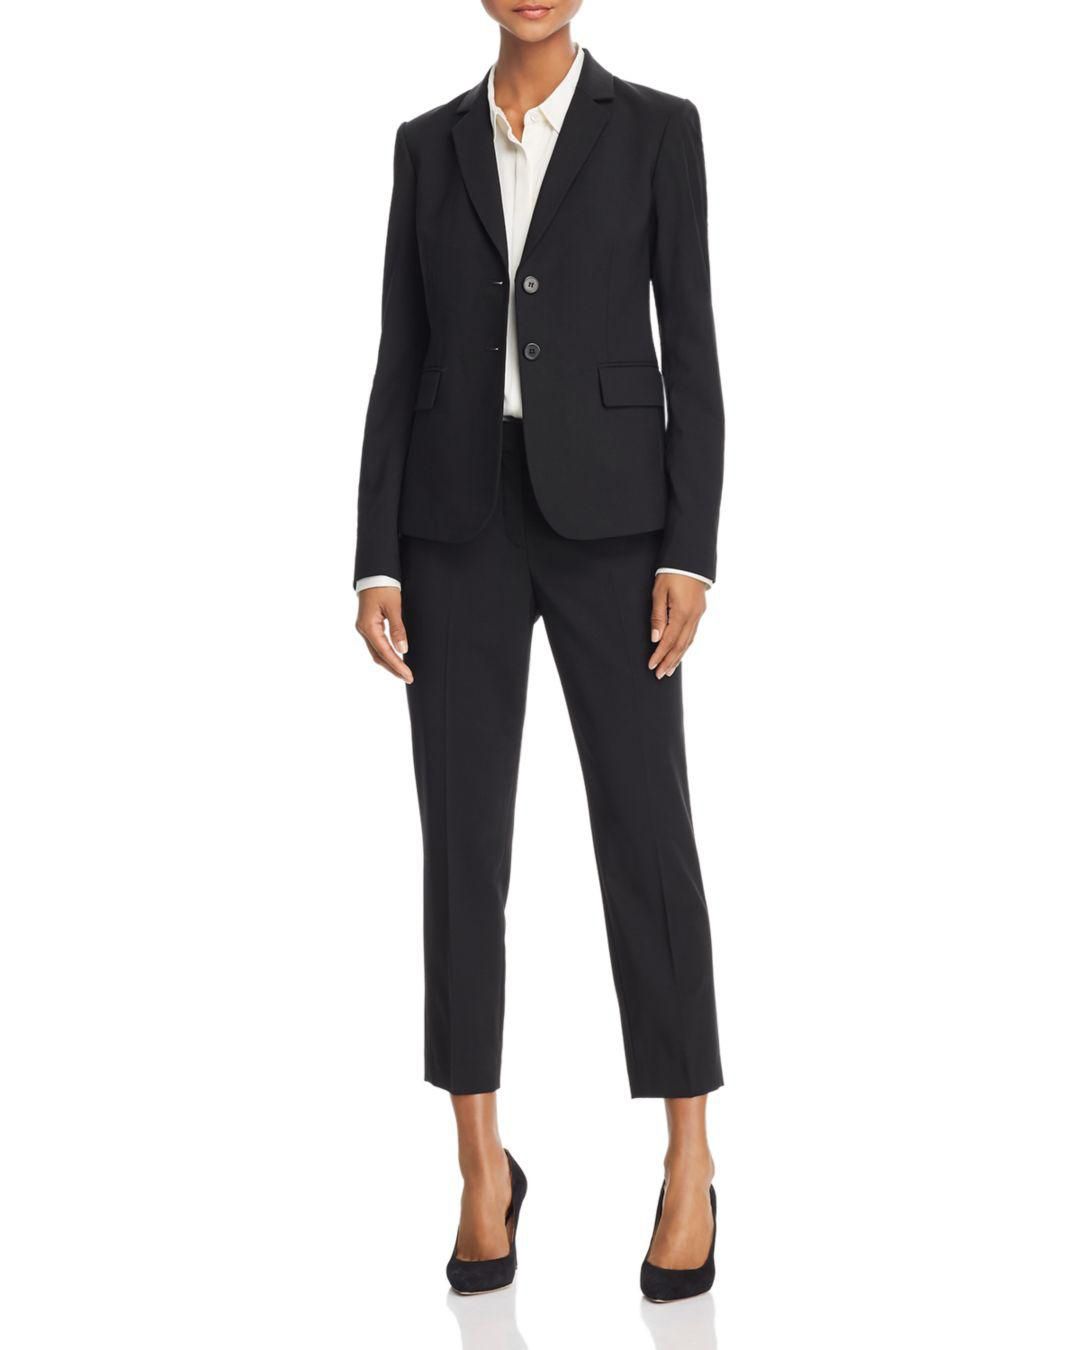 Chic Wedding Suits for Mothers of the Bride and Groom | Martha Stewart